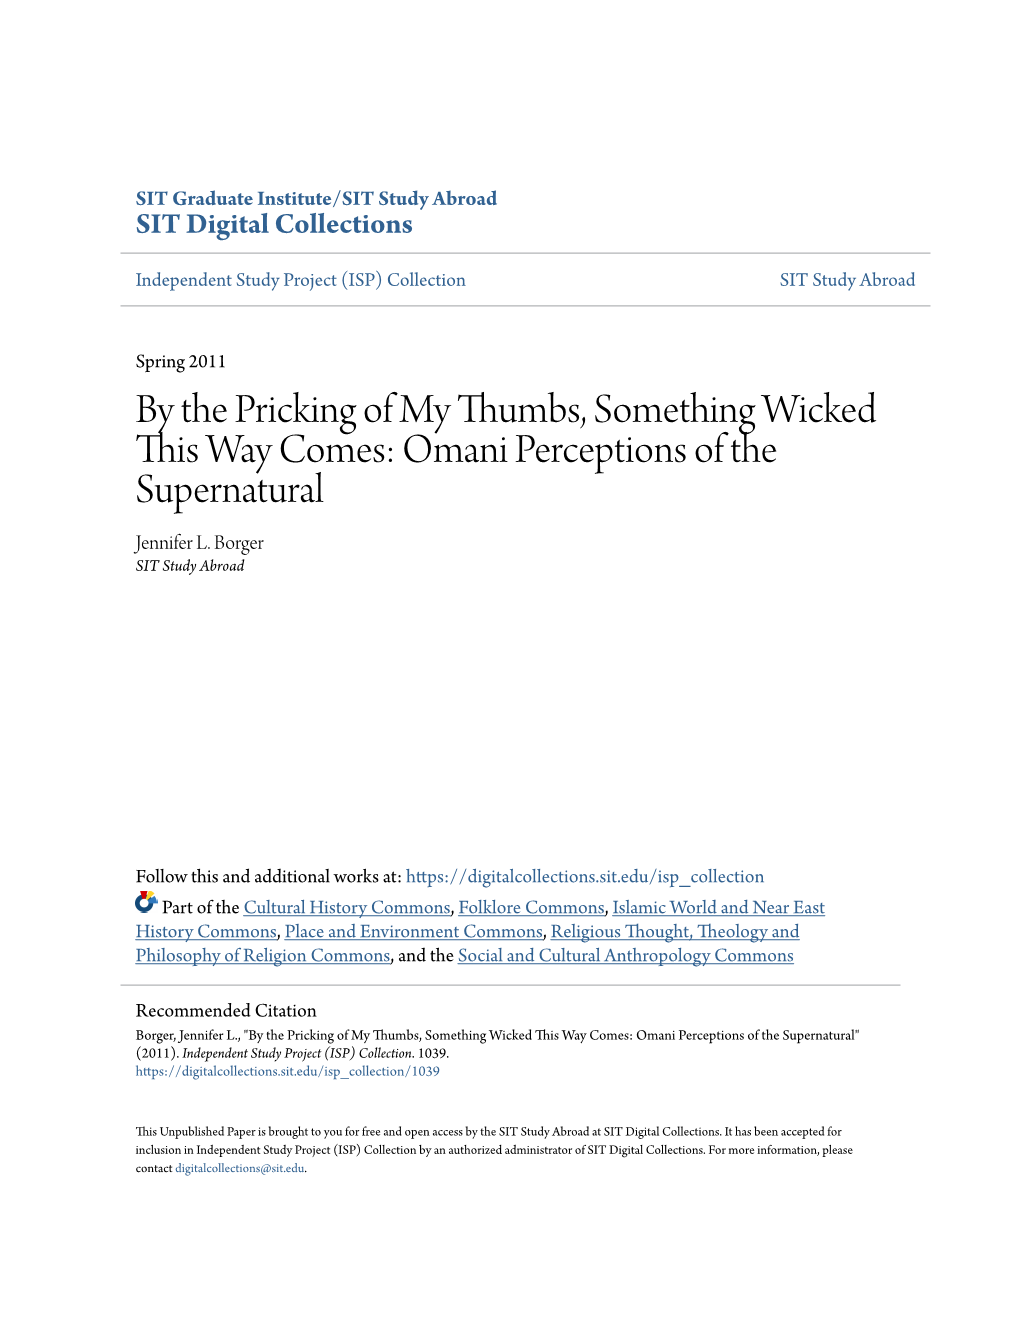 By the Pricking of My Thumbs, Something Wicked This Way Comes: Omani Perceptions of the Supernatural Jennifer L